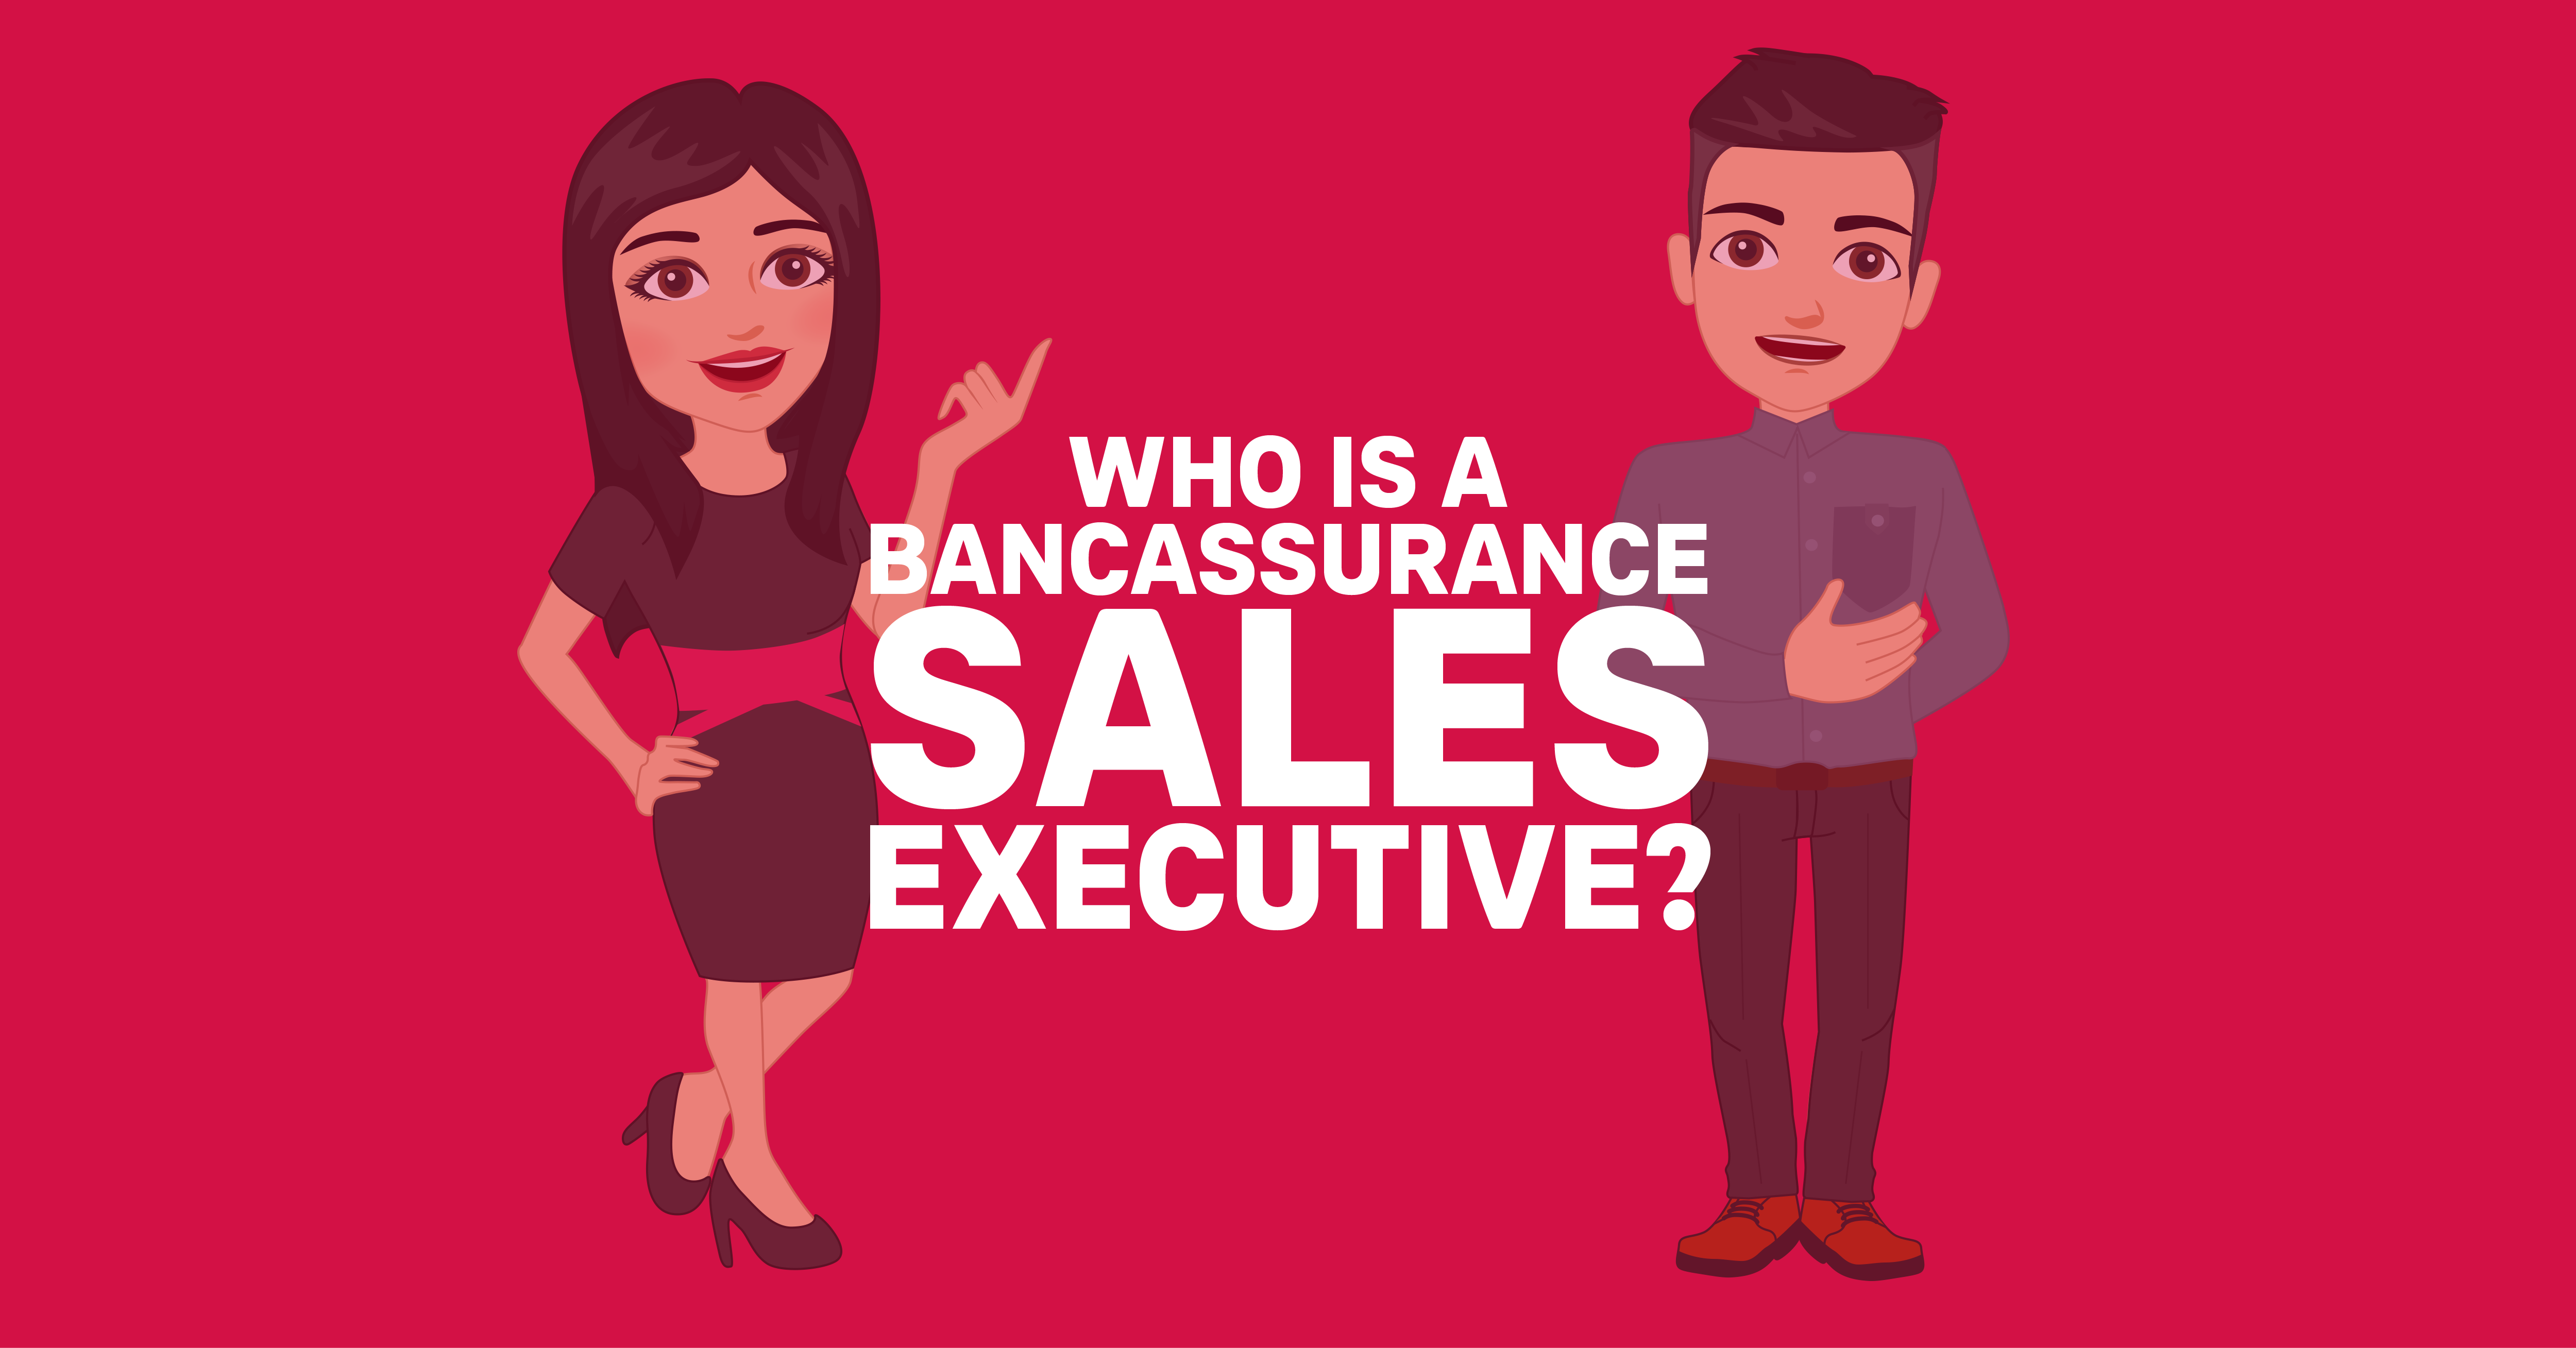 Who Is A Bancassurance Sales Executive